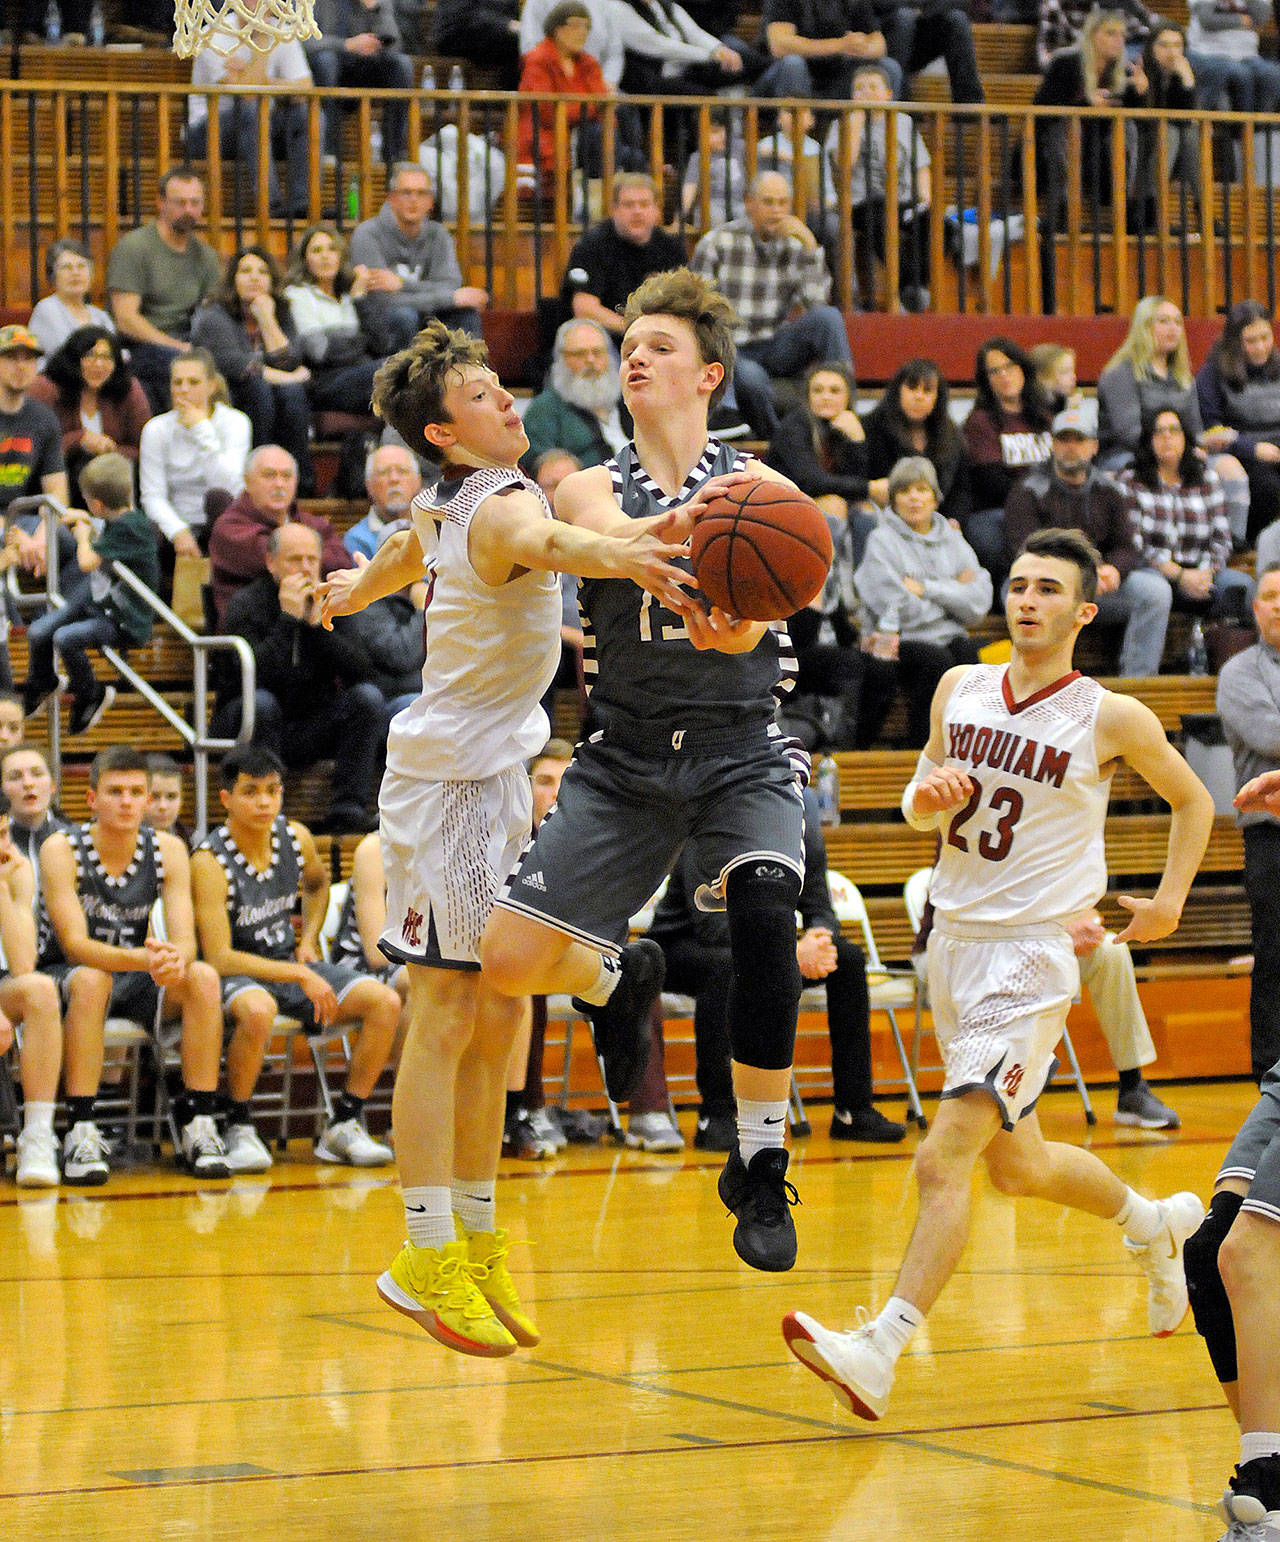 Montesano’s Carter Olsen, middle, drives to the basket against Hoquiam’s Cameron Bumstead during the Bulldogs’ 71-42 victory on Friday at Hoquiam High School. Olsen scored 20 points to lead all scorers. (Ryan Sparks | Grays Harbor News Group)